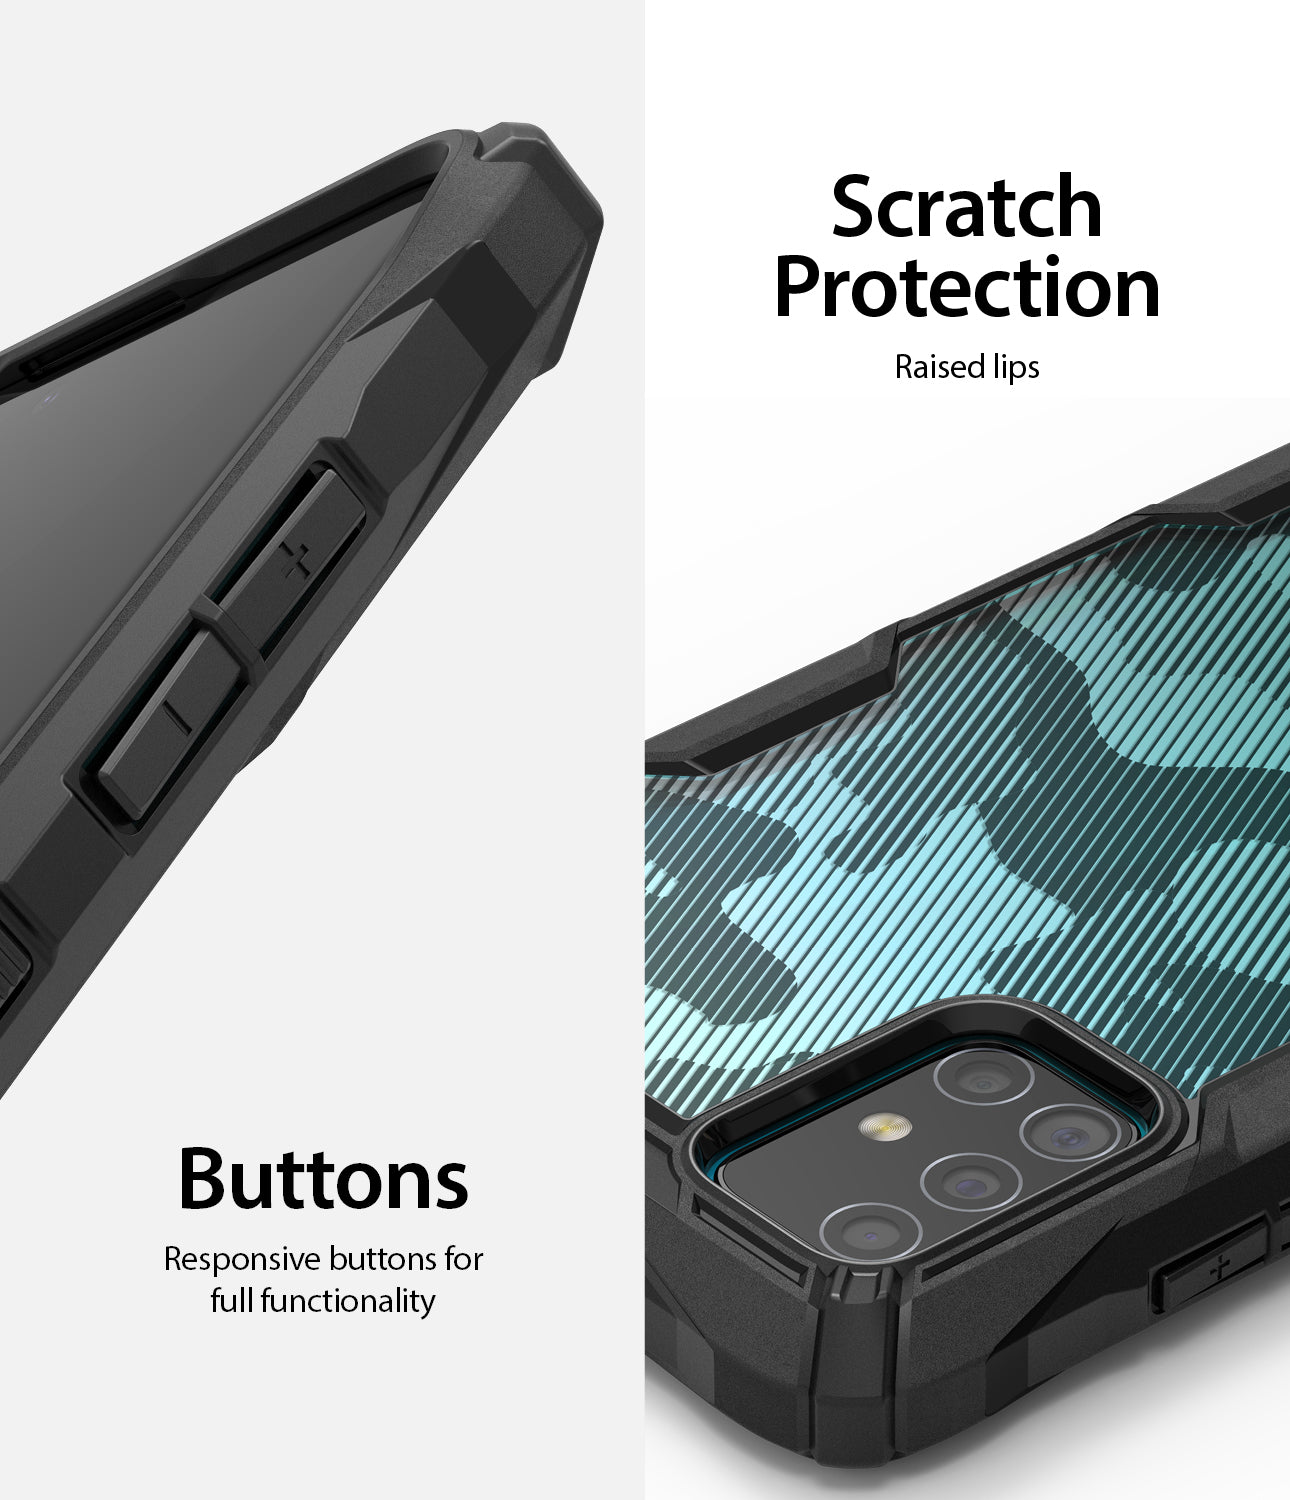 scratch protection raised lip, responsive buttons for full functionality